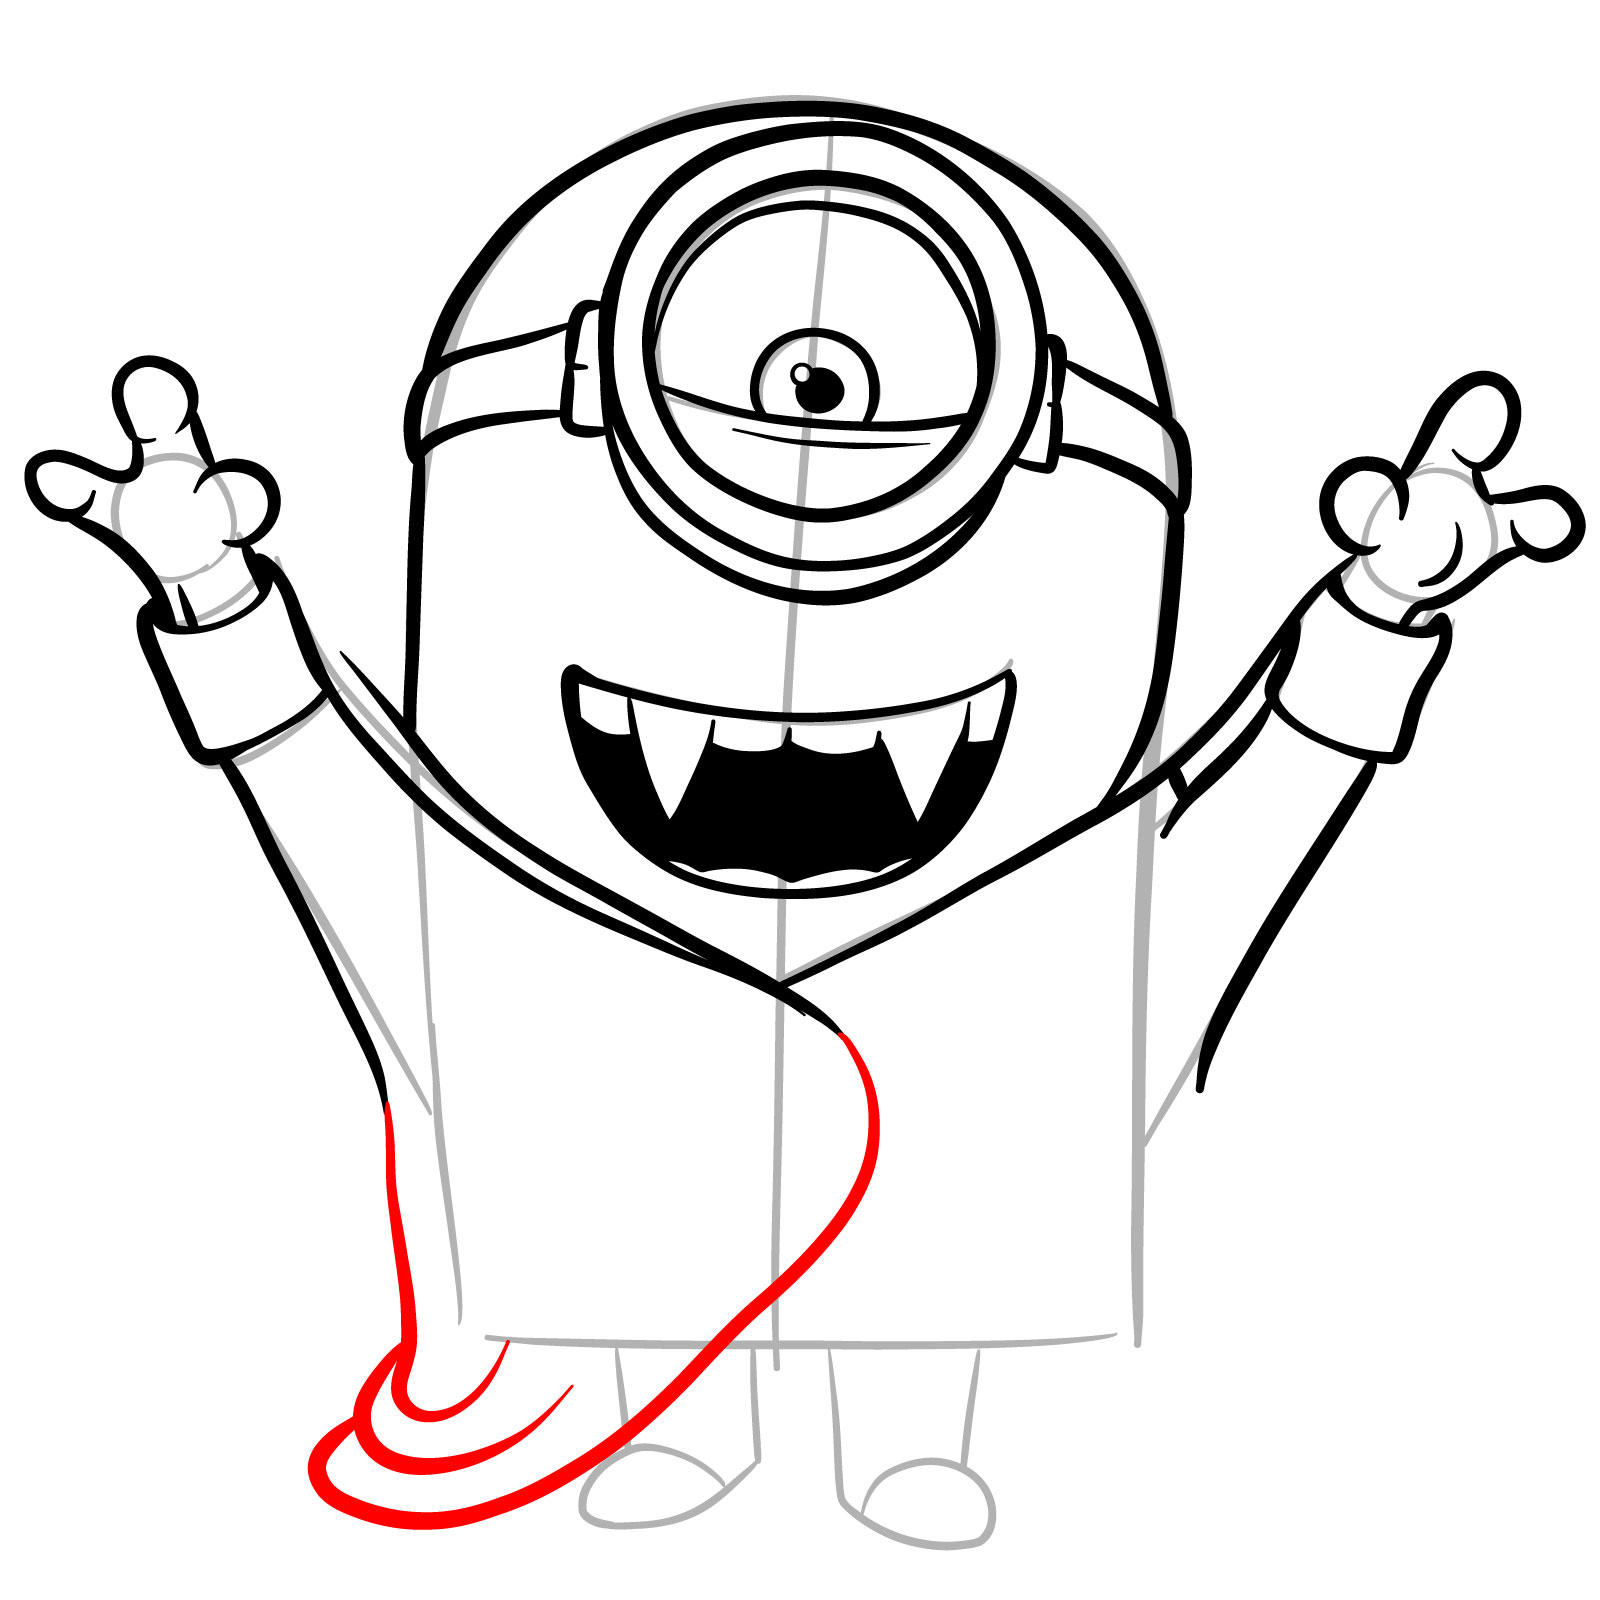 How to Draw a Vampire Minion - step 17